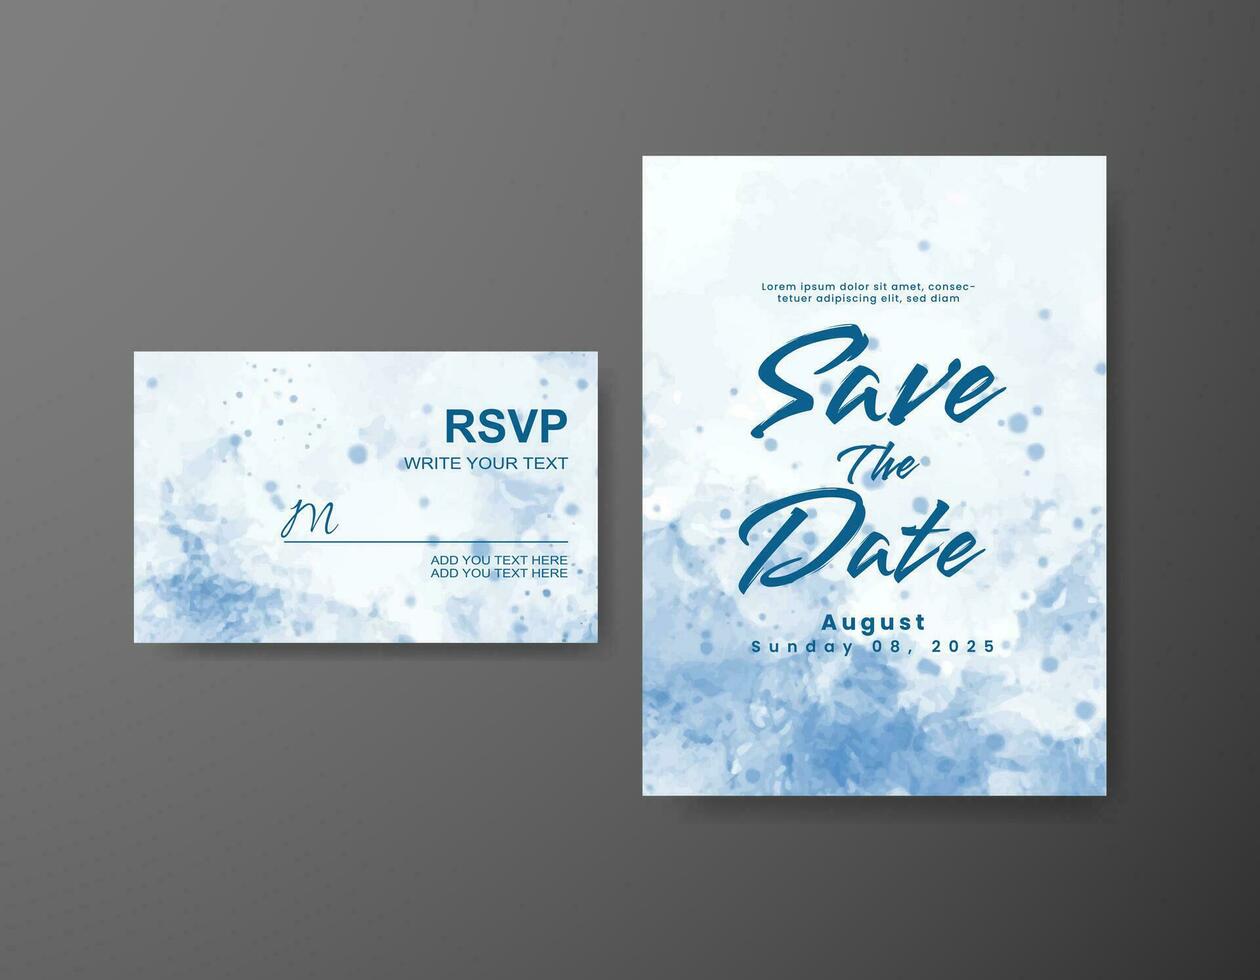 Save the date with watercolor background. Design for your invitation. vector